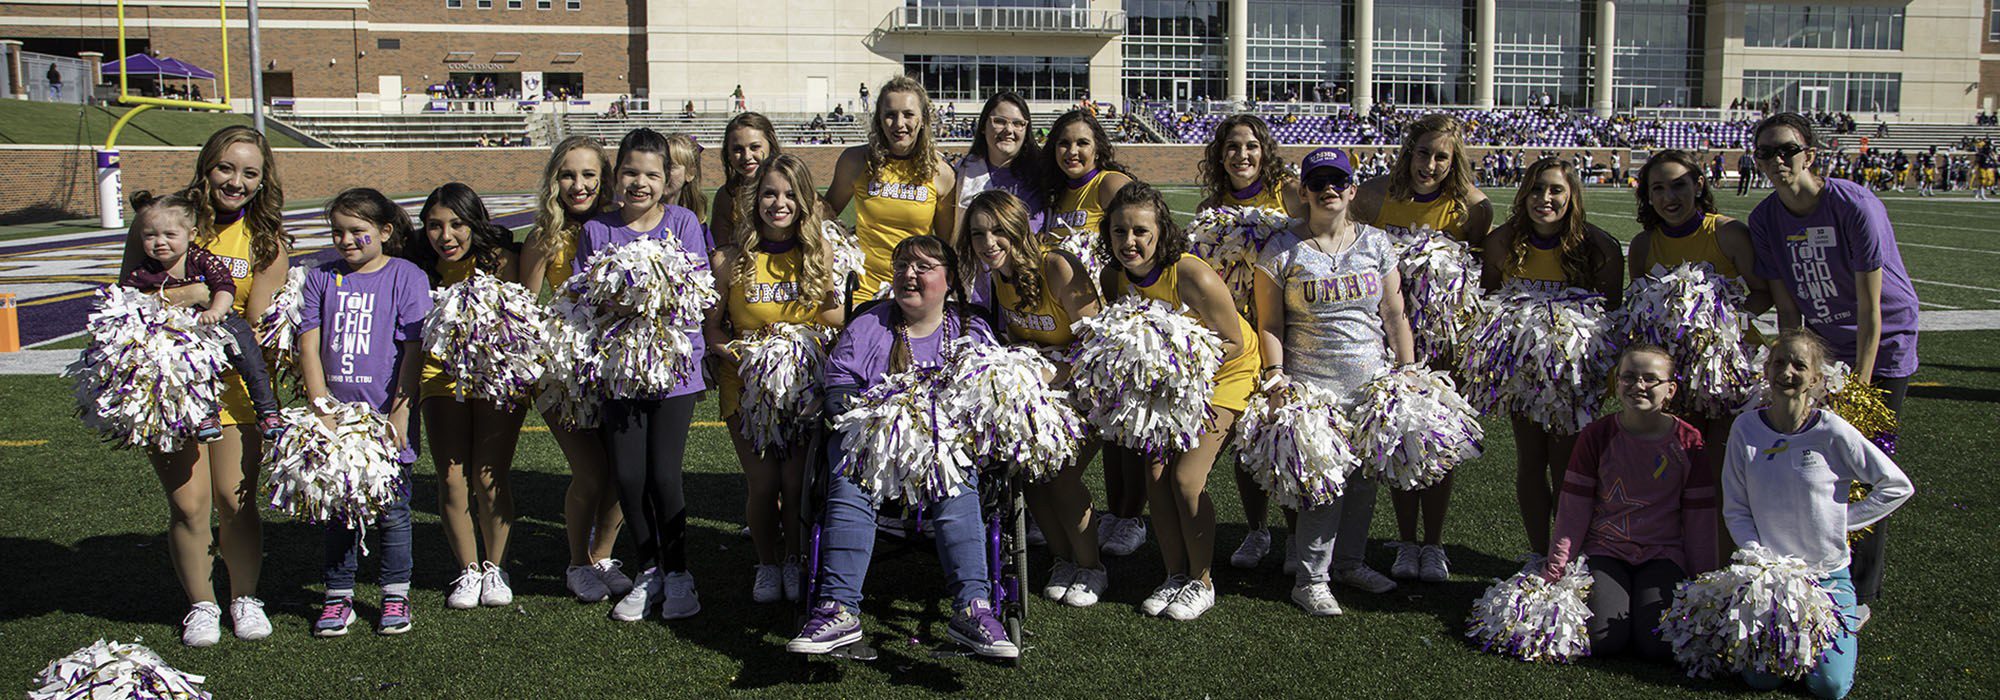 UMHB Celebrates Special Needs Community with TOUCHDOWNS Event